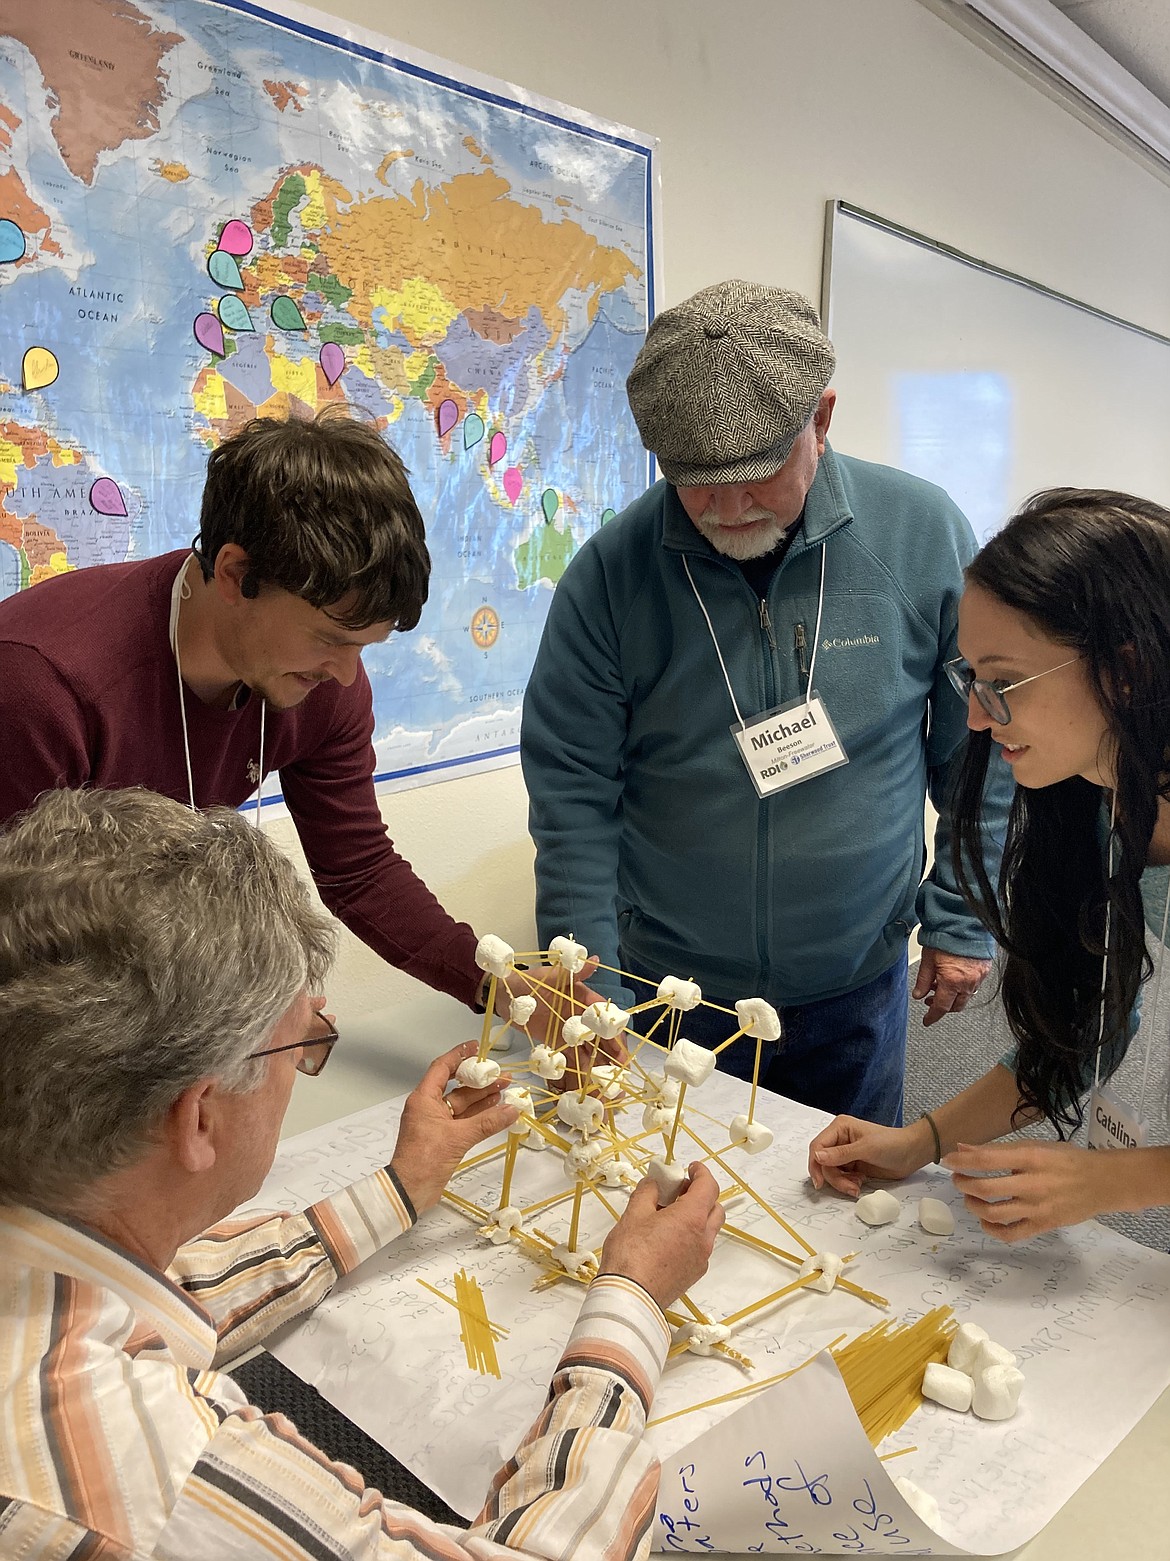 Cohort members of the Rural Community Leadership Program in Milton-Freewater perform a teamwork exercise that challenges them to communicate effectively.